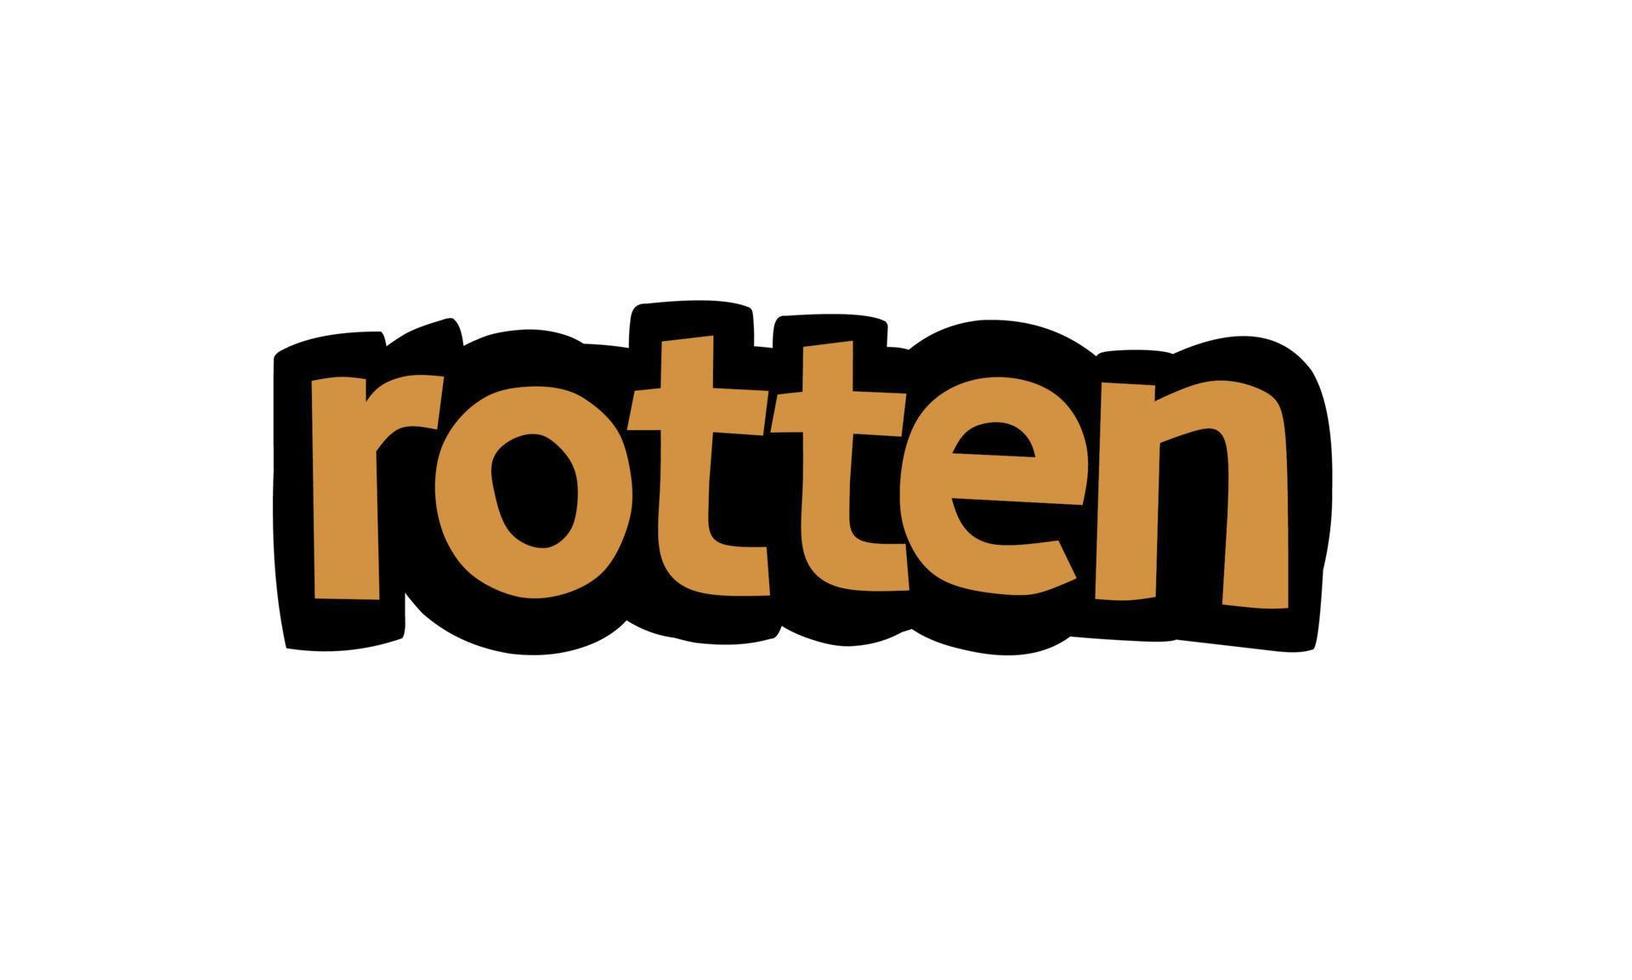 ROTTEN writing vector design on white background